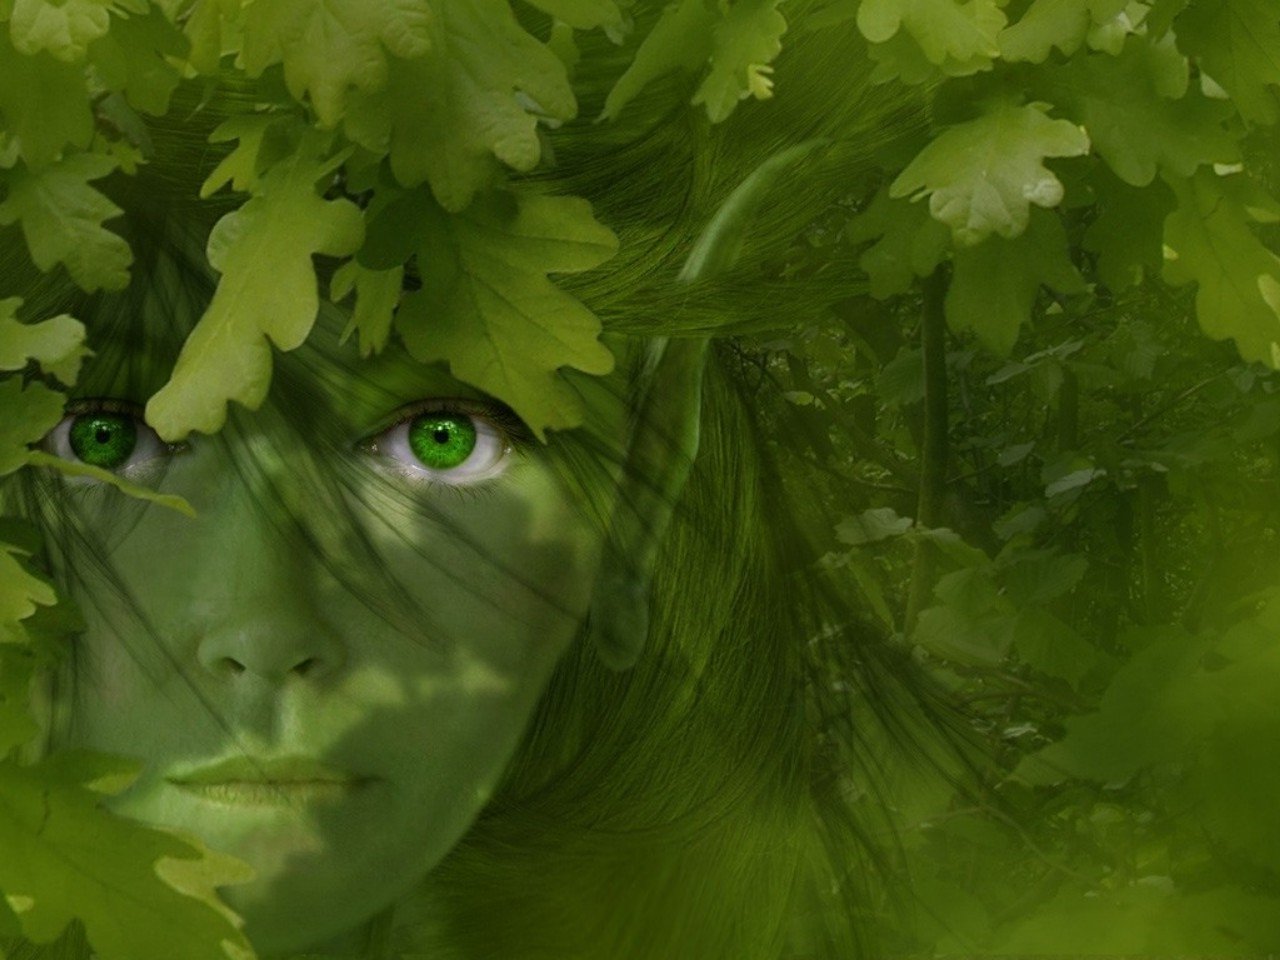 Green Eyes - Image Abyss.